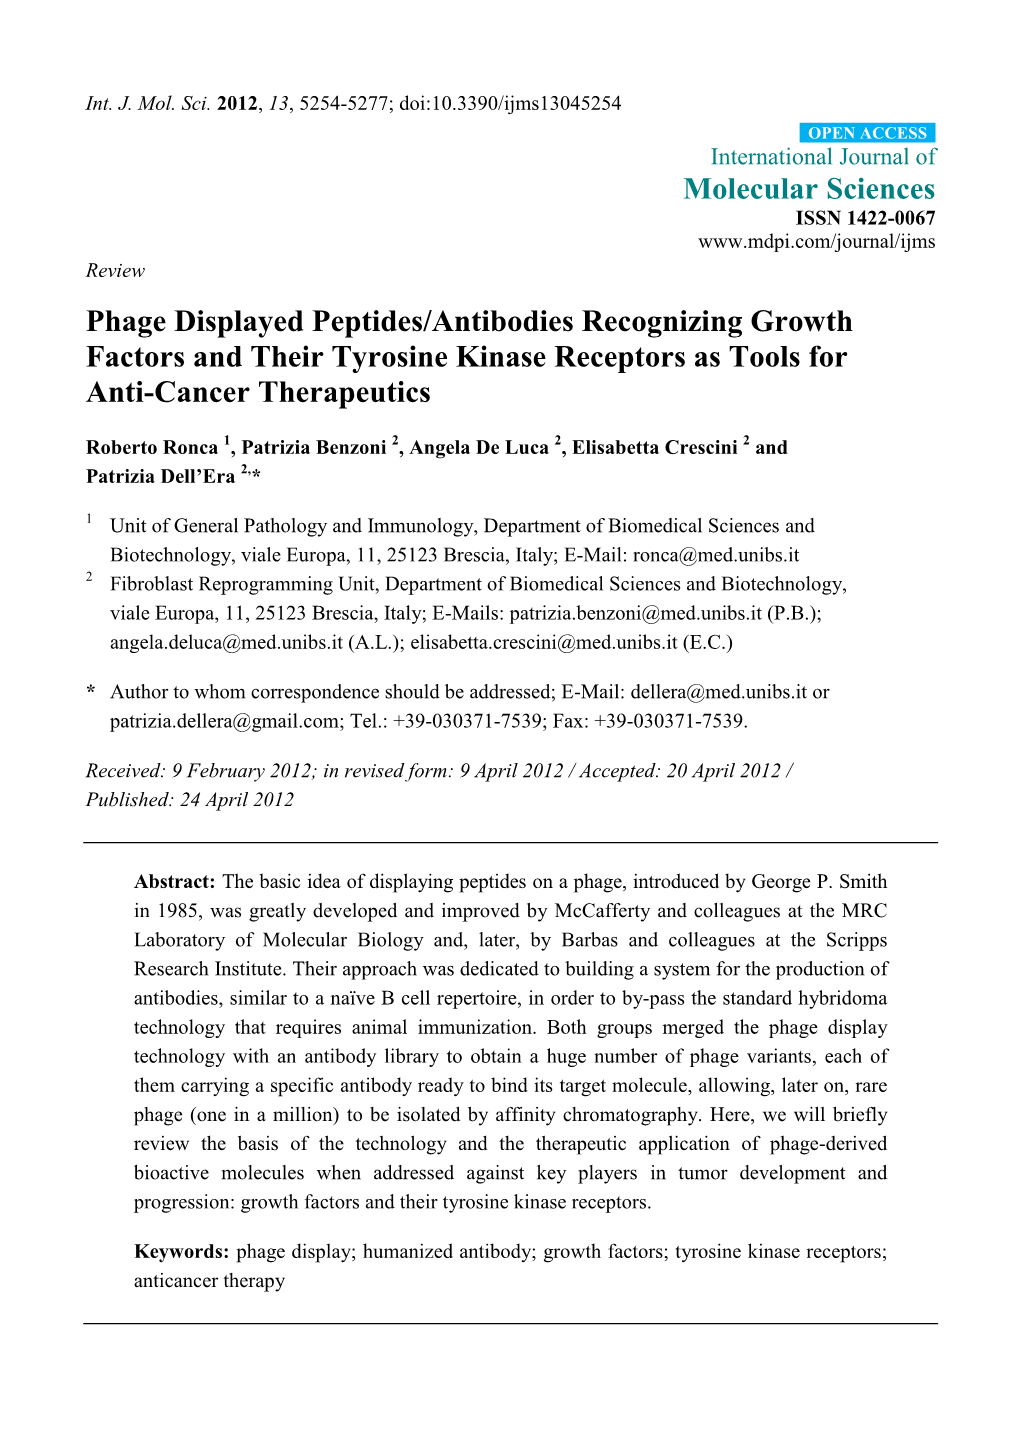 Phage Displayed Peptides/Antibodies Recognizing Growth Factors and Their Tyrosine Kinase Receptors As Tools for Anti-Cancer Therapeutics